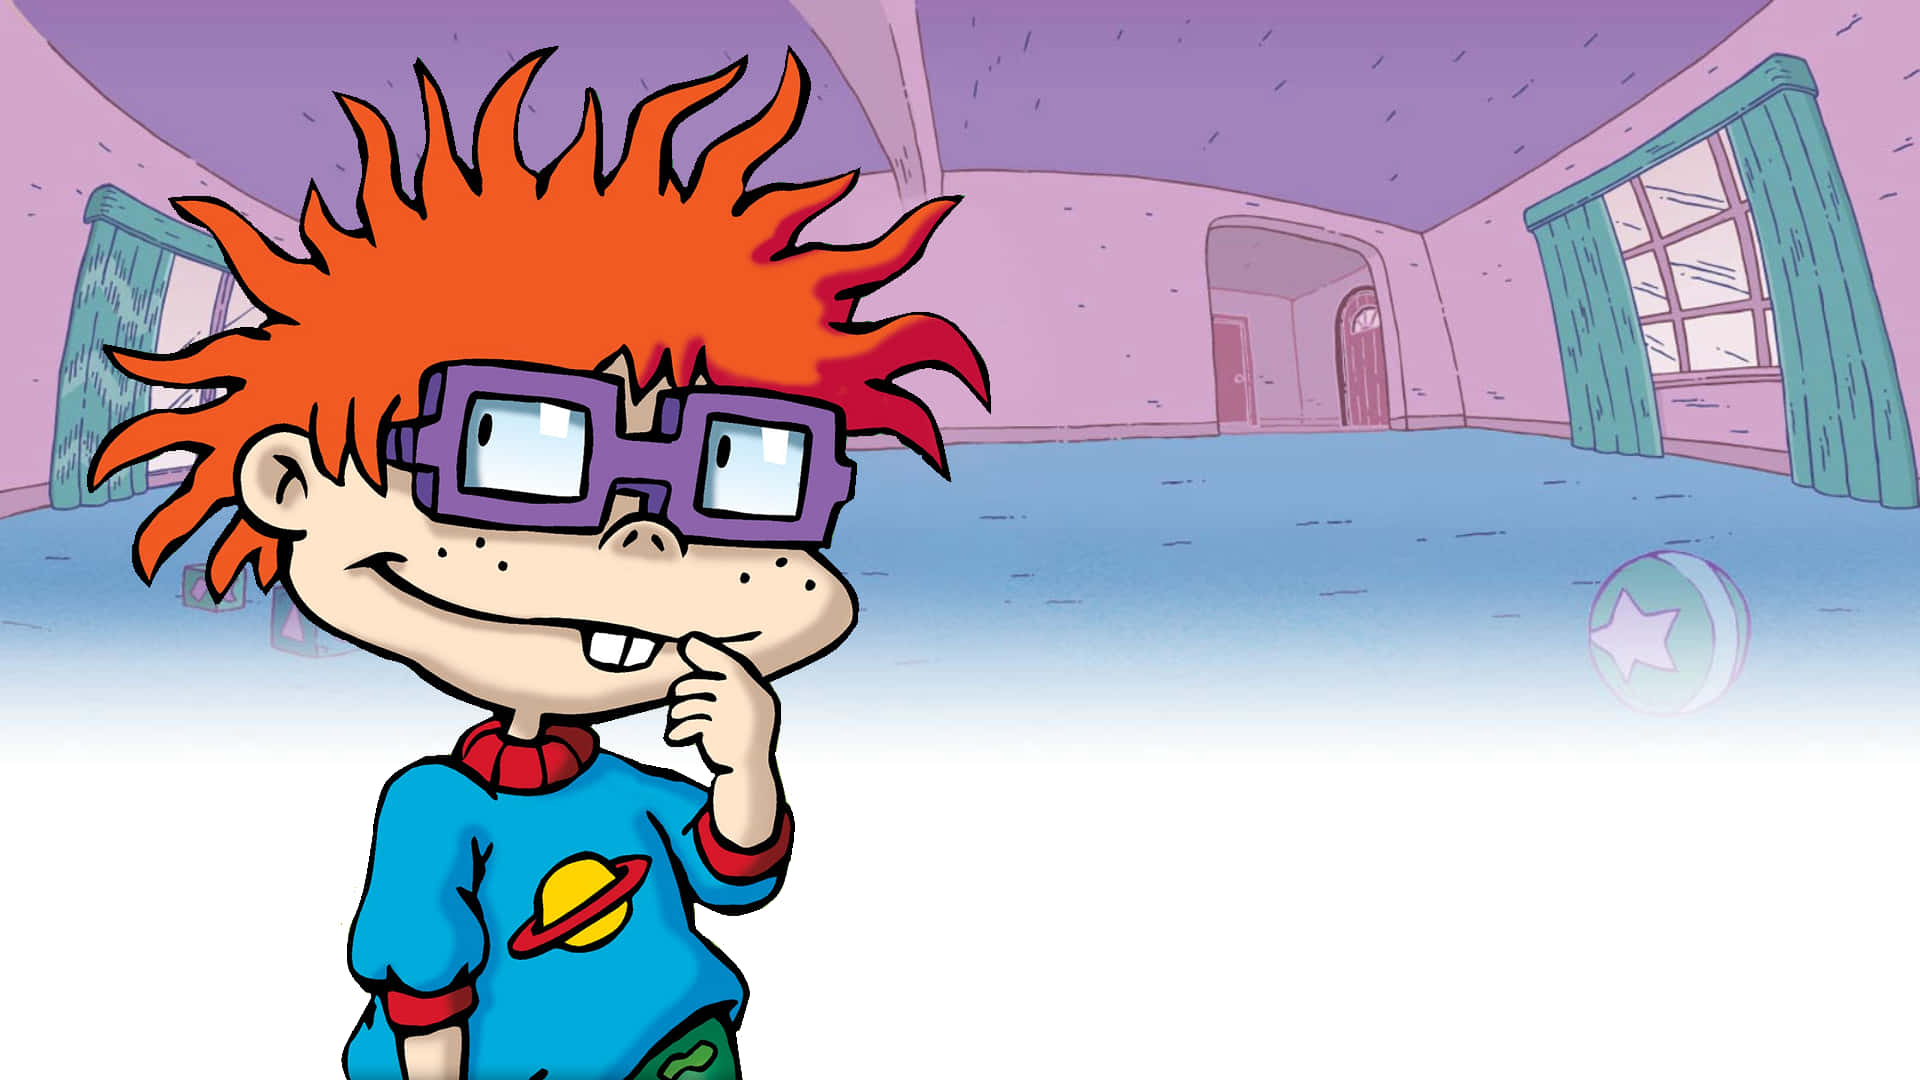 A Cartoon Character With Red Hair And Glasses Standing In A Room Wallpaper